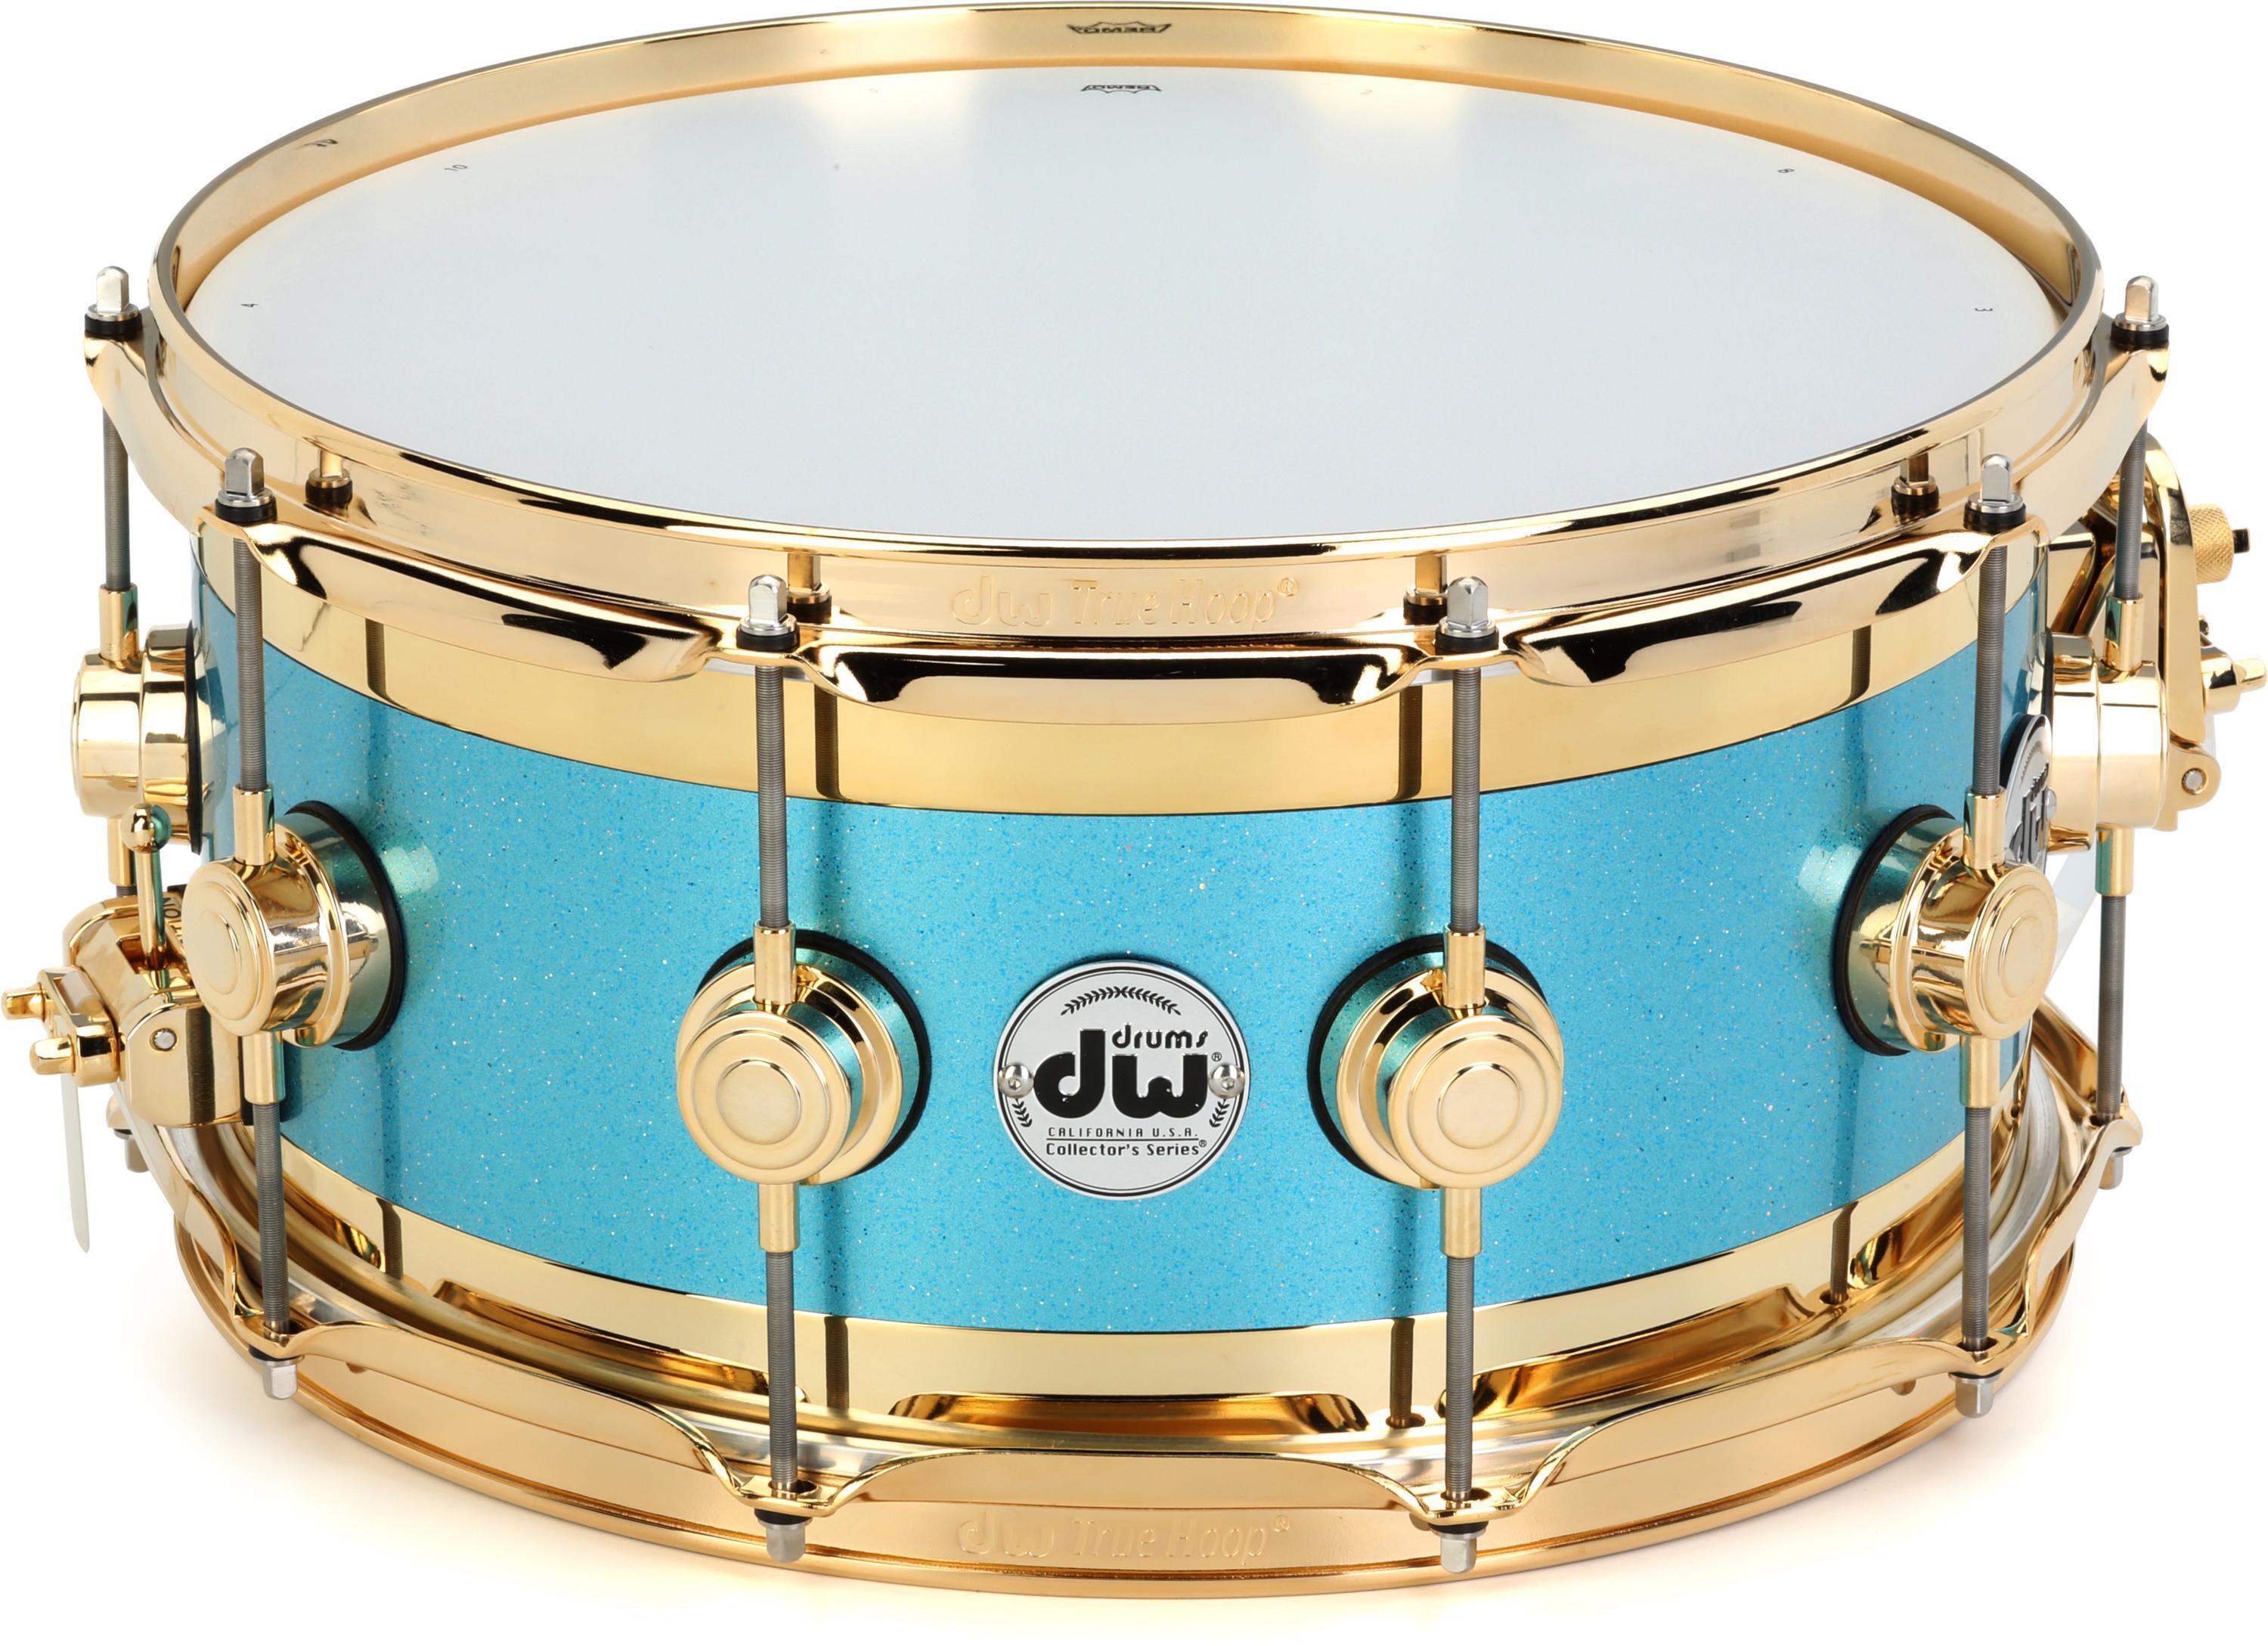 Collector's Series Edge Snare Drum - 7 x 14-inch - Silver Blue